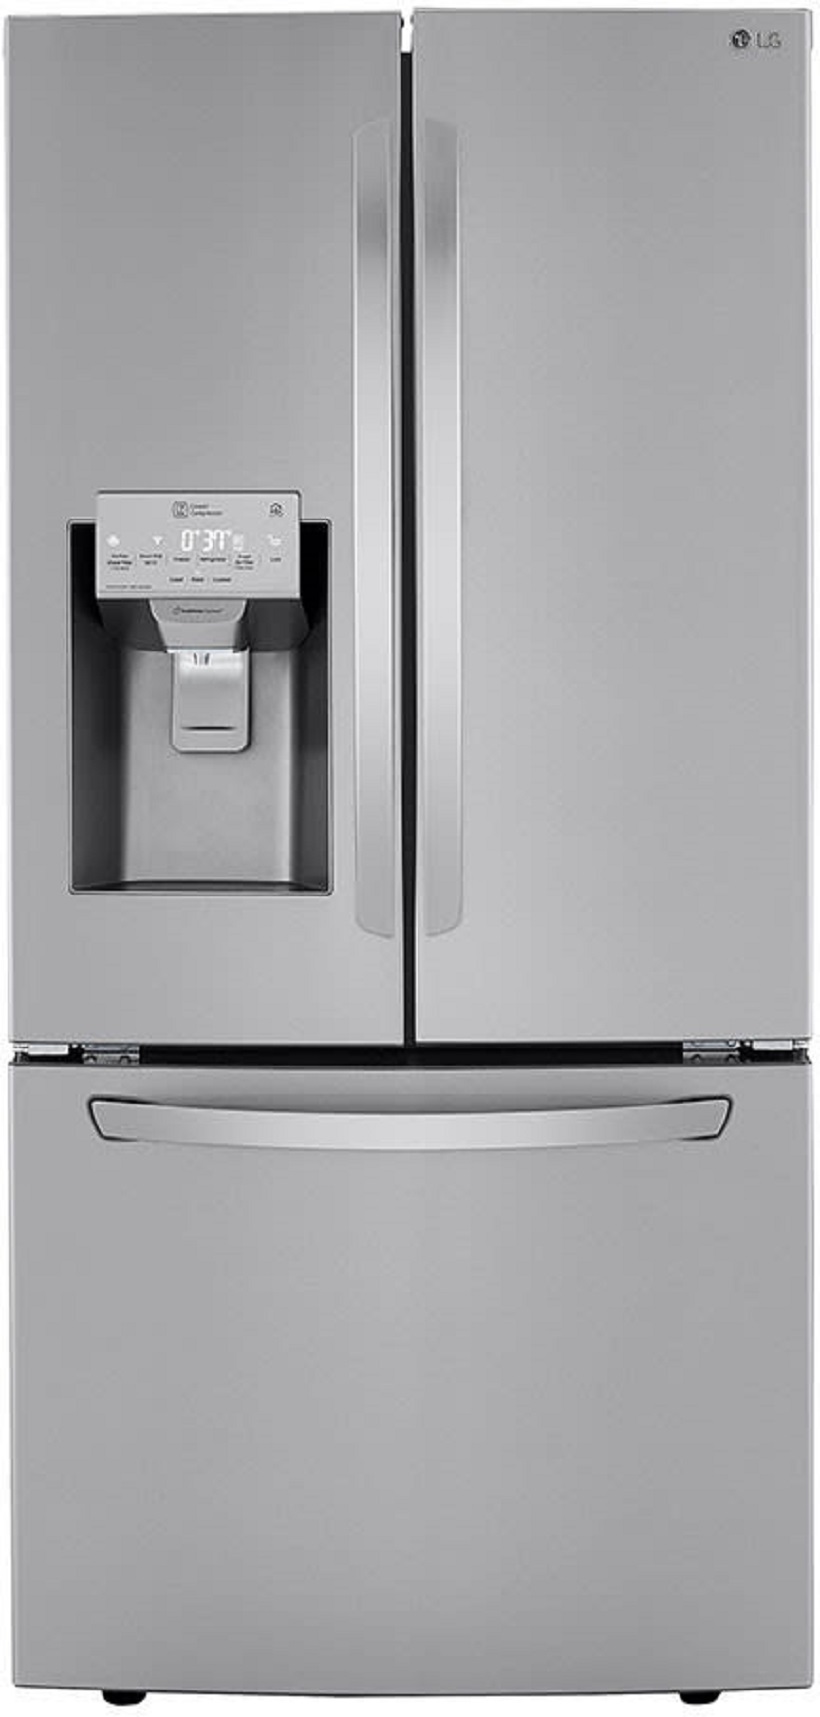 Lg LRFXS2503S 33 Inch, 25 Cu. Ft. French Door Refrigerator with Enabled WiFi PrintProof